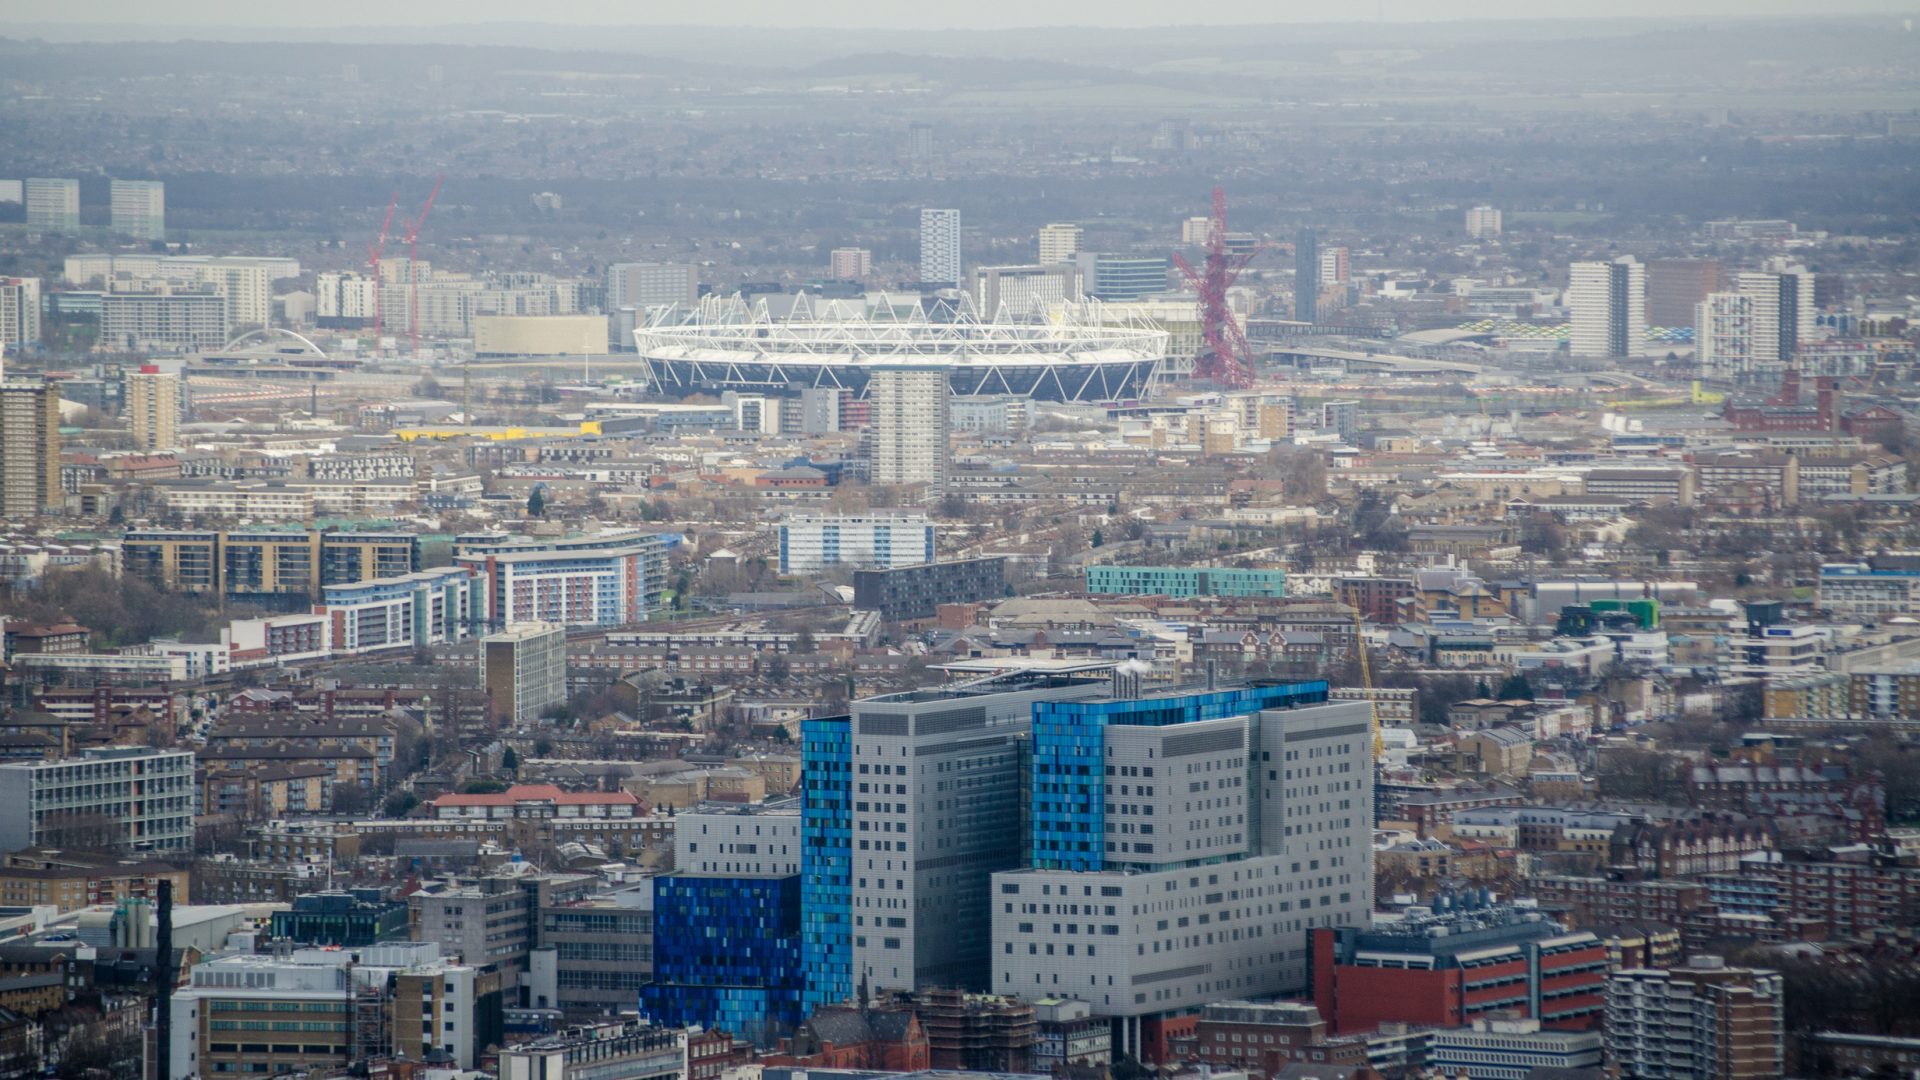 Aerial View of Whitechapel and Stratford